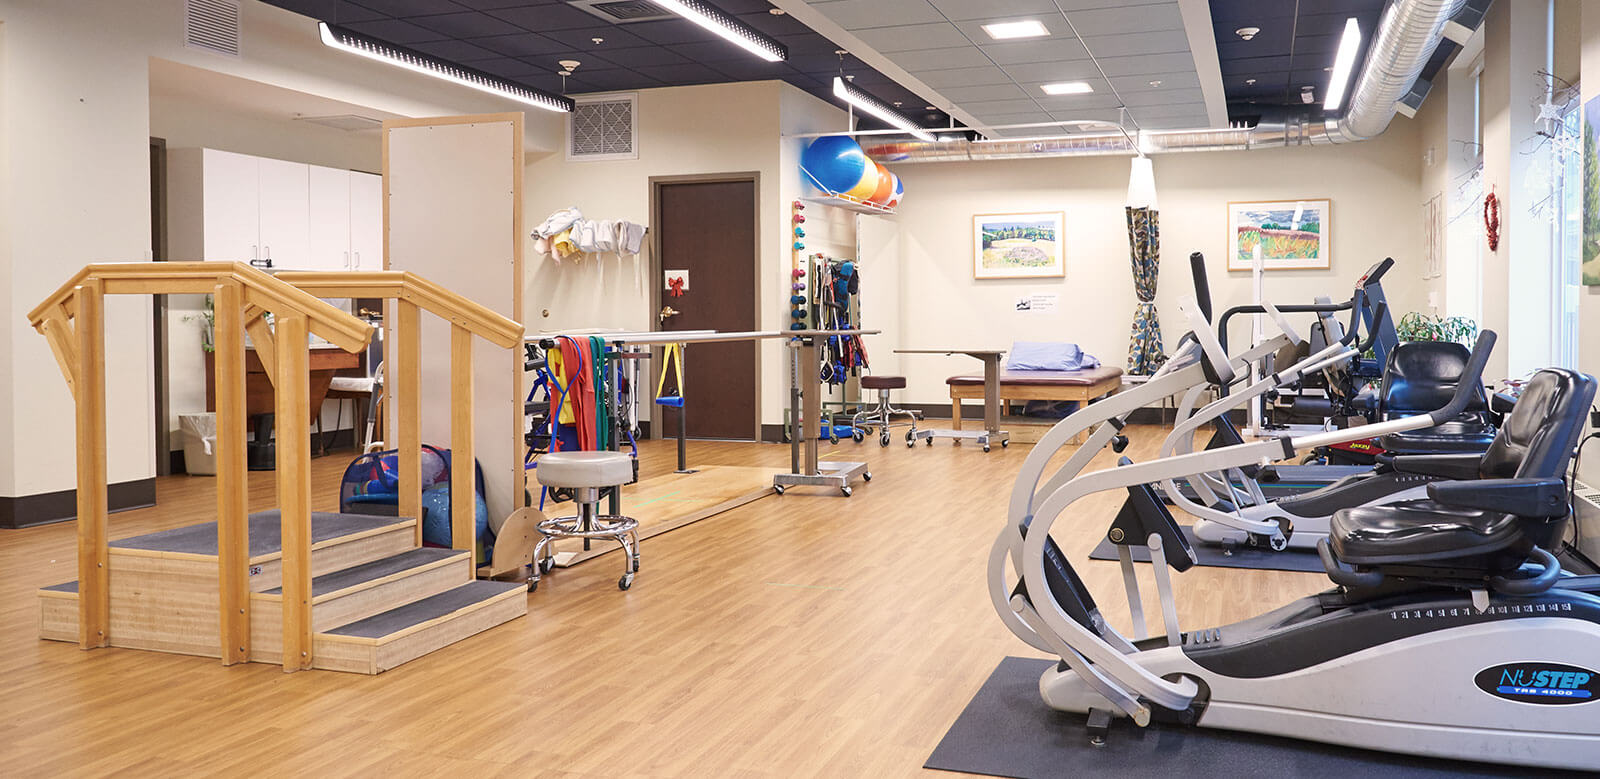 Our Senior Wellness Approach Physical Therapy Room